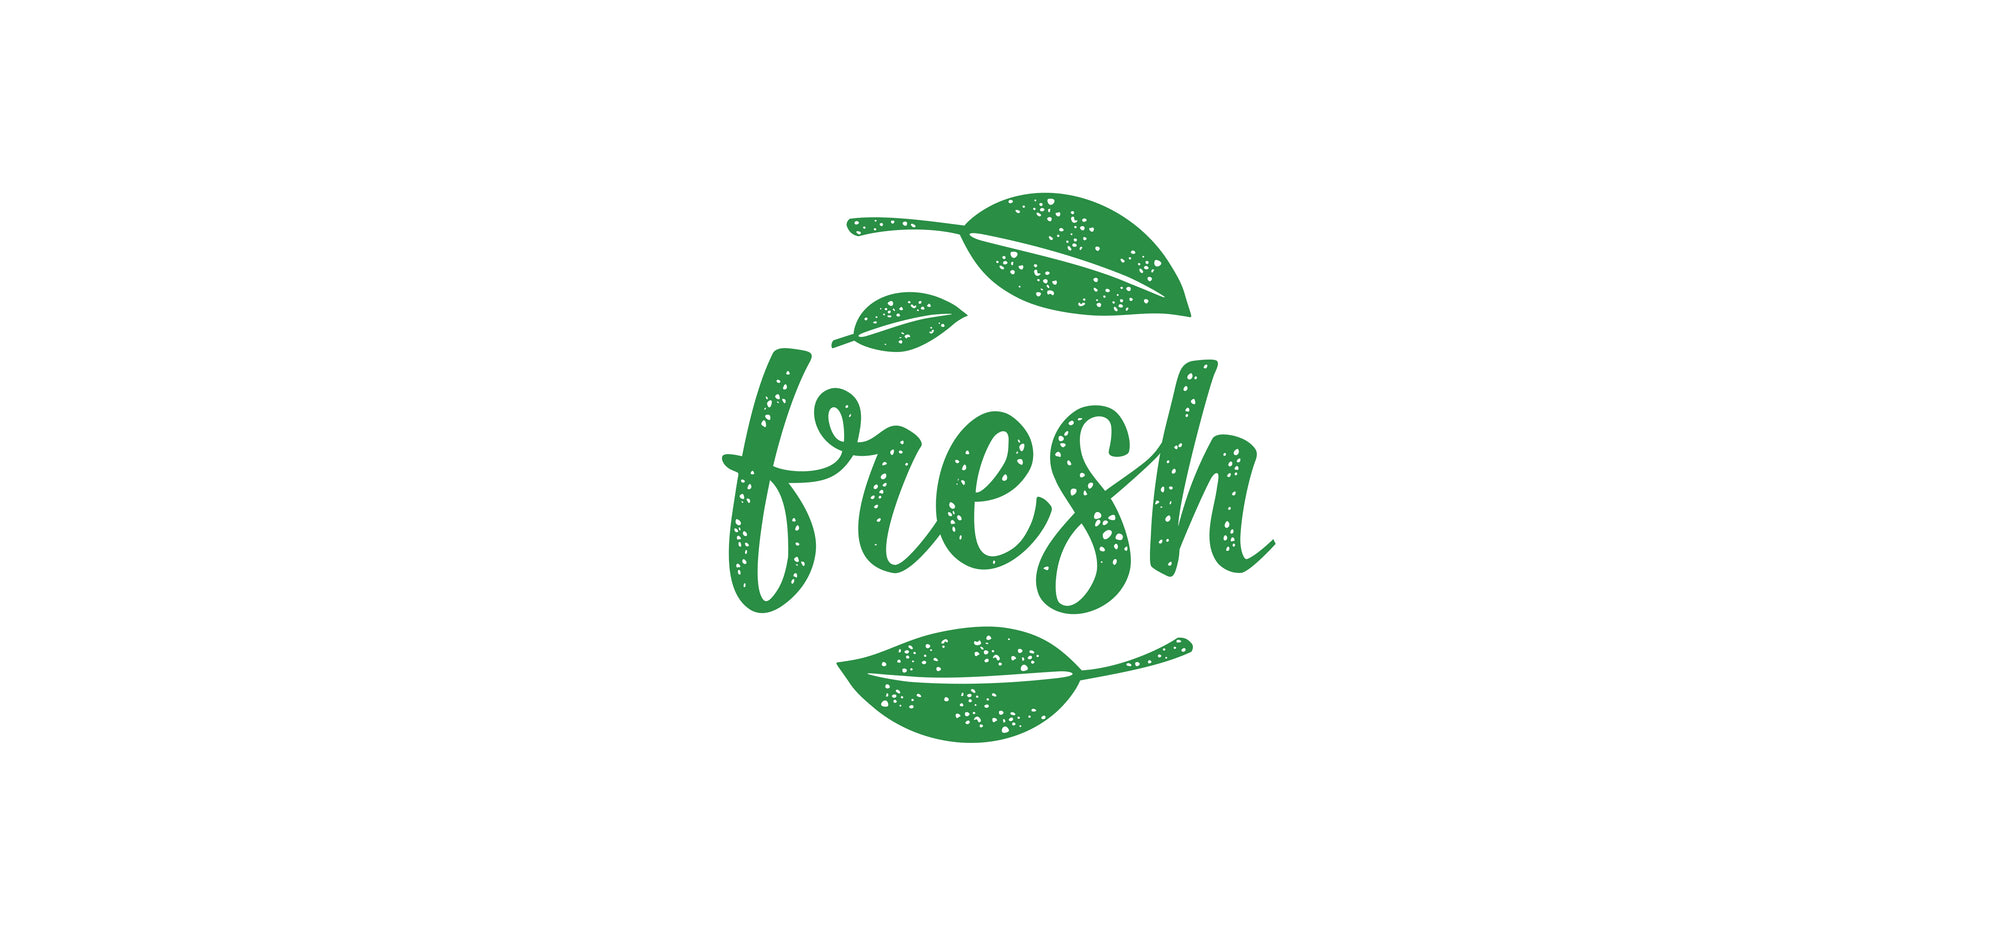 We only harvest fresh, deliver fresh, and keep all greens fresh until it’s replenished.